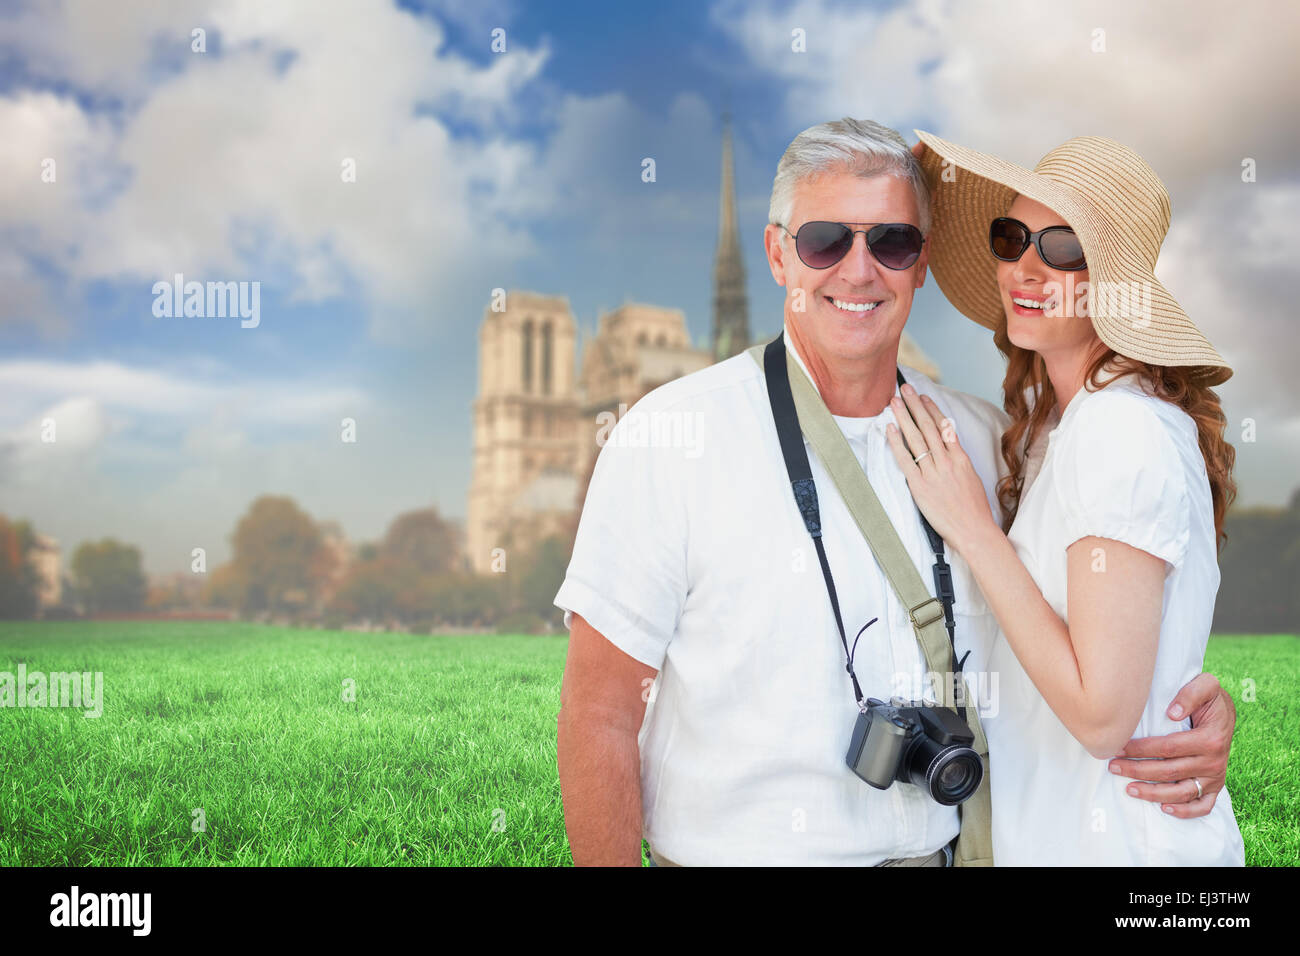 Composite image of vacationing couple Stock Photo